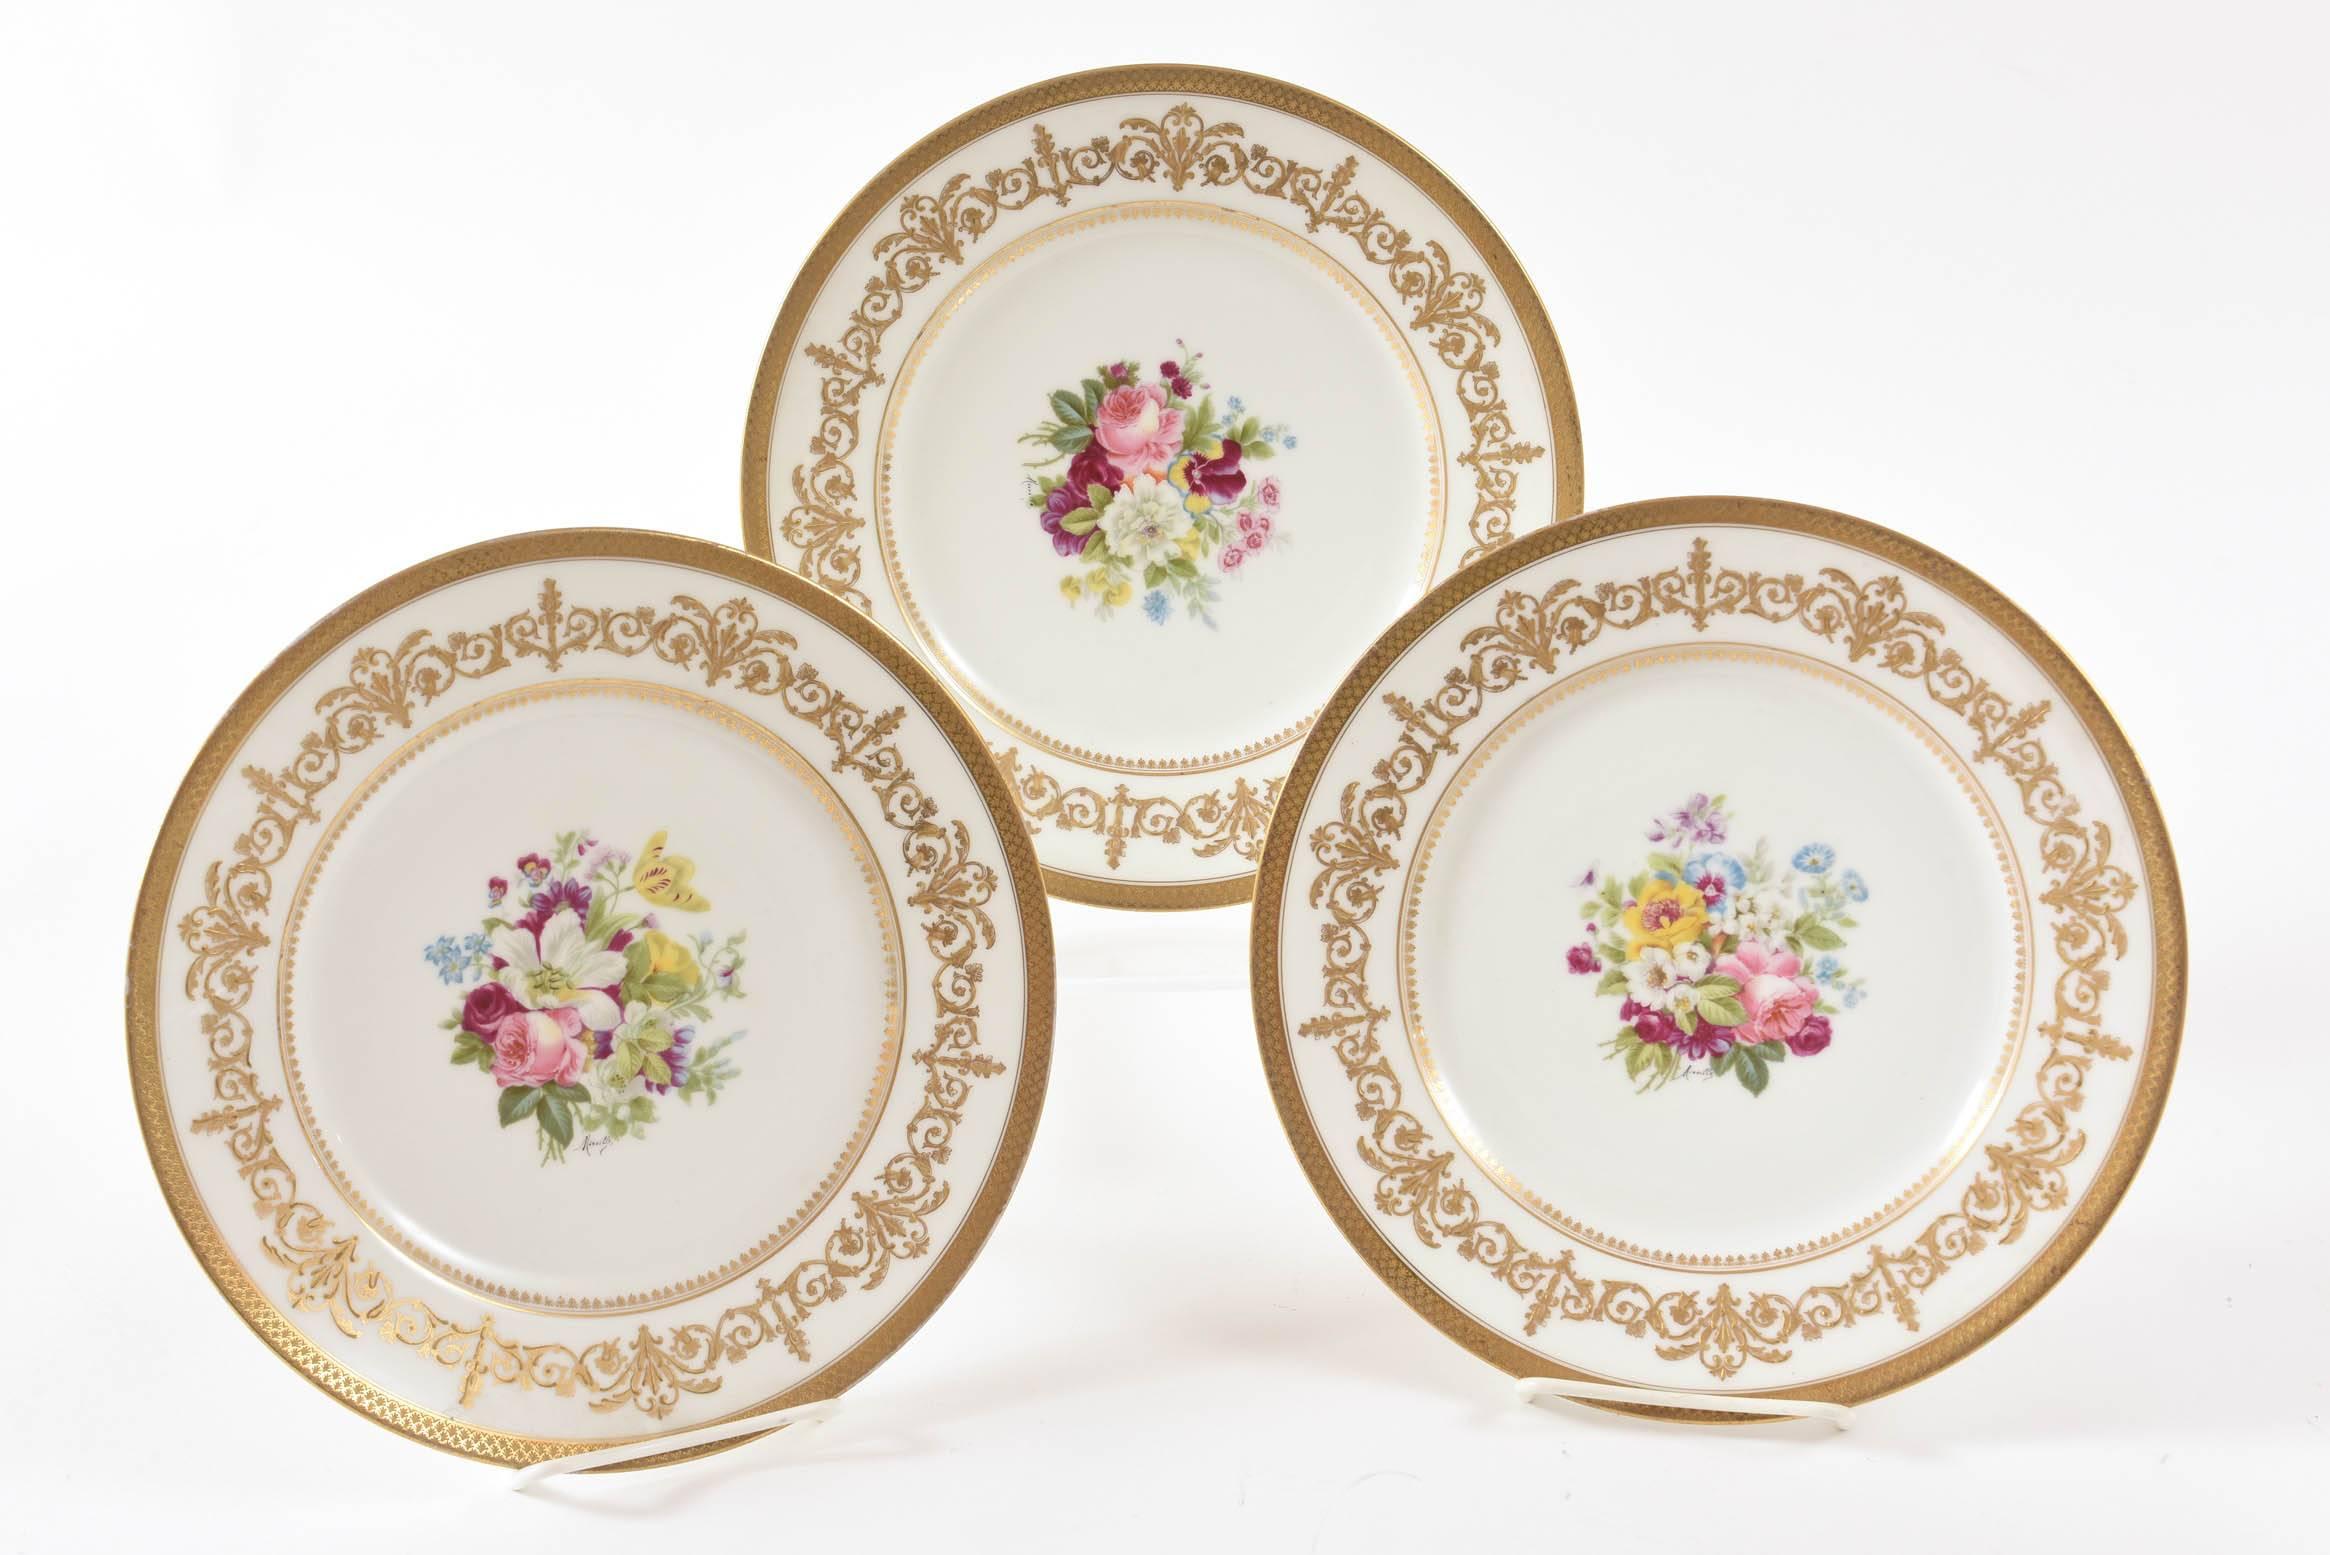 A beautiful hand-painted and artist signed set of plates by Charles Ahrenfeldt, Limoges and signed by Mireille. Each plate has a different selection of hand-painted flowers in the center and an elaborately decorated gilt collar finished with an acid